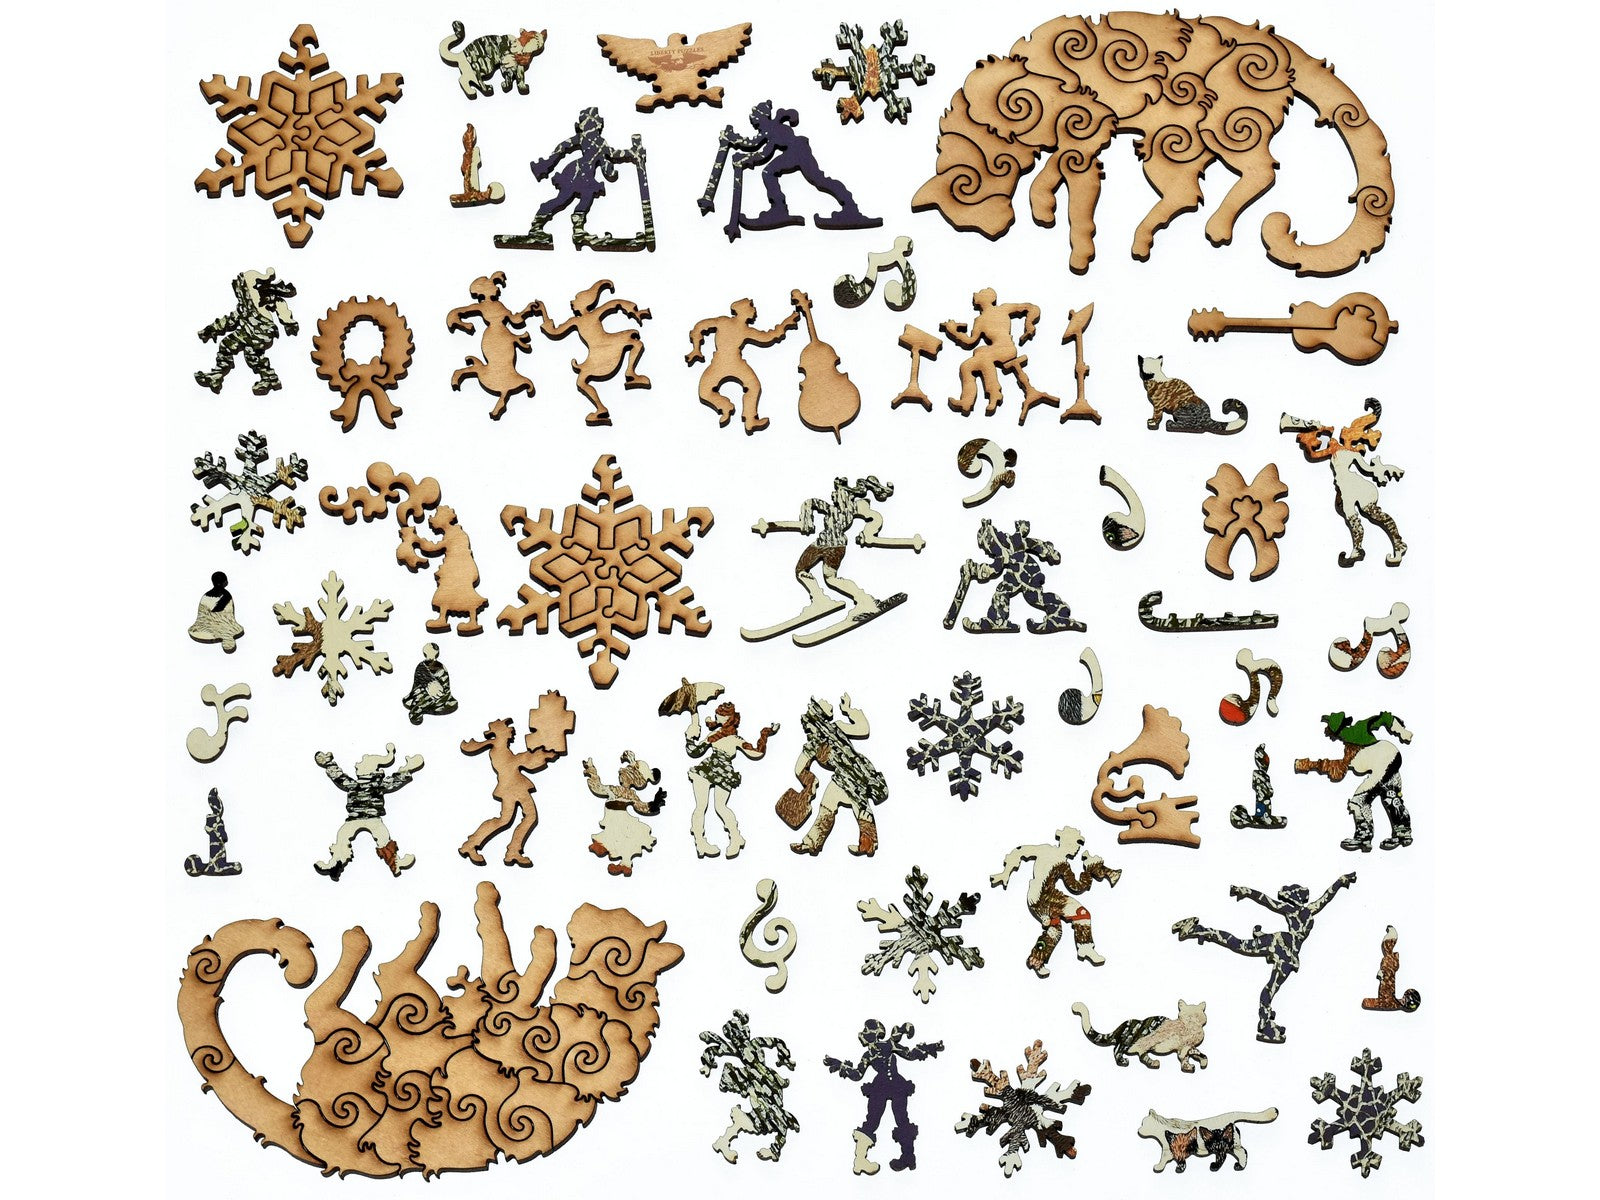 The whimsies that can be found in the puzzle, A Resounding Success.